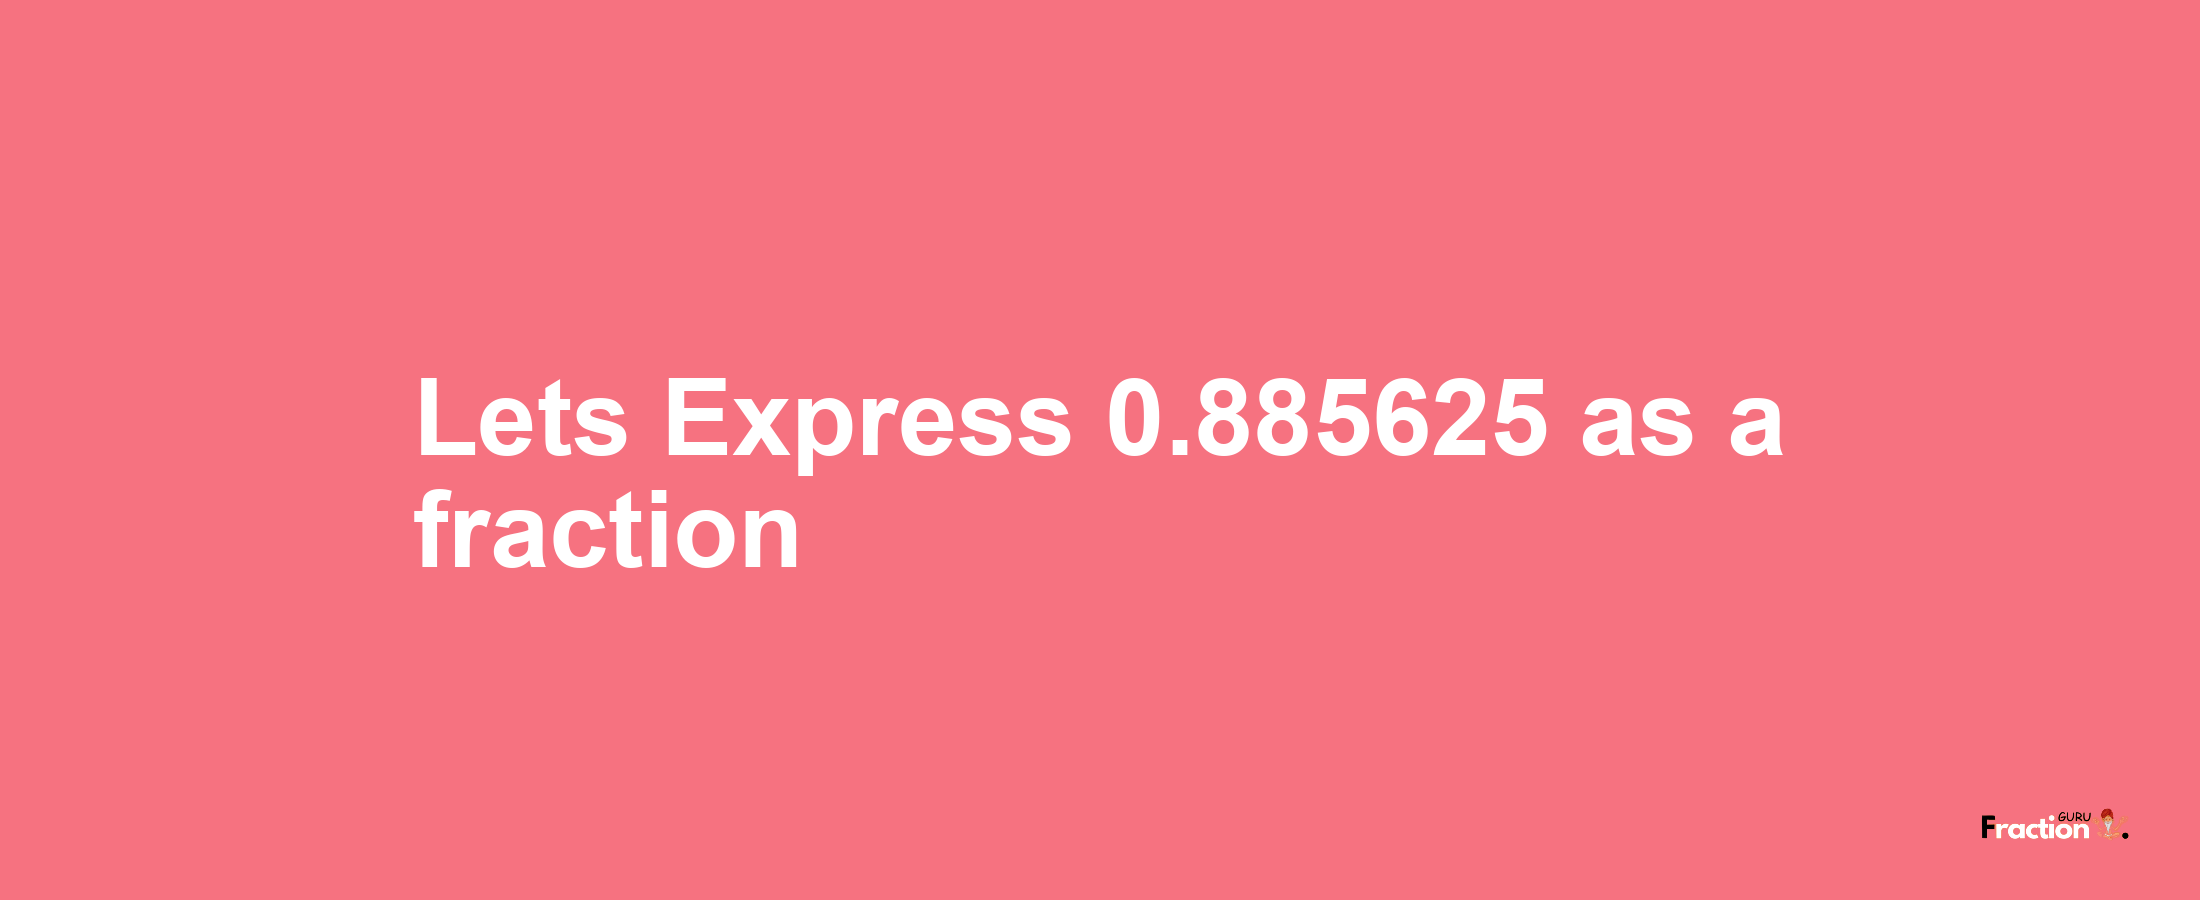 Lets Express 0.885625 as afraction